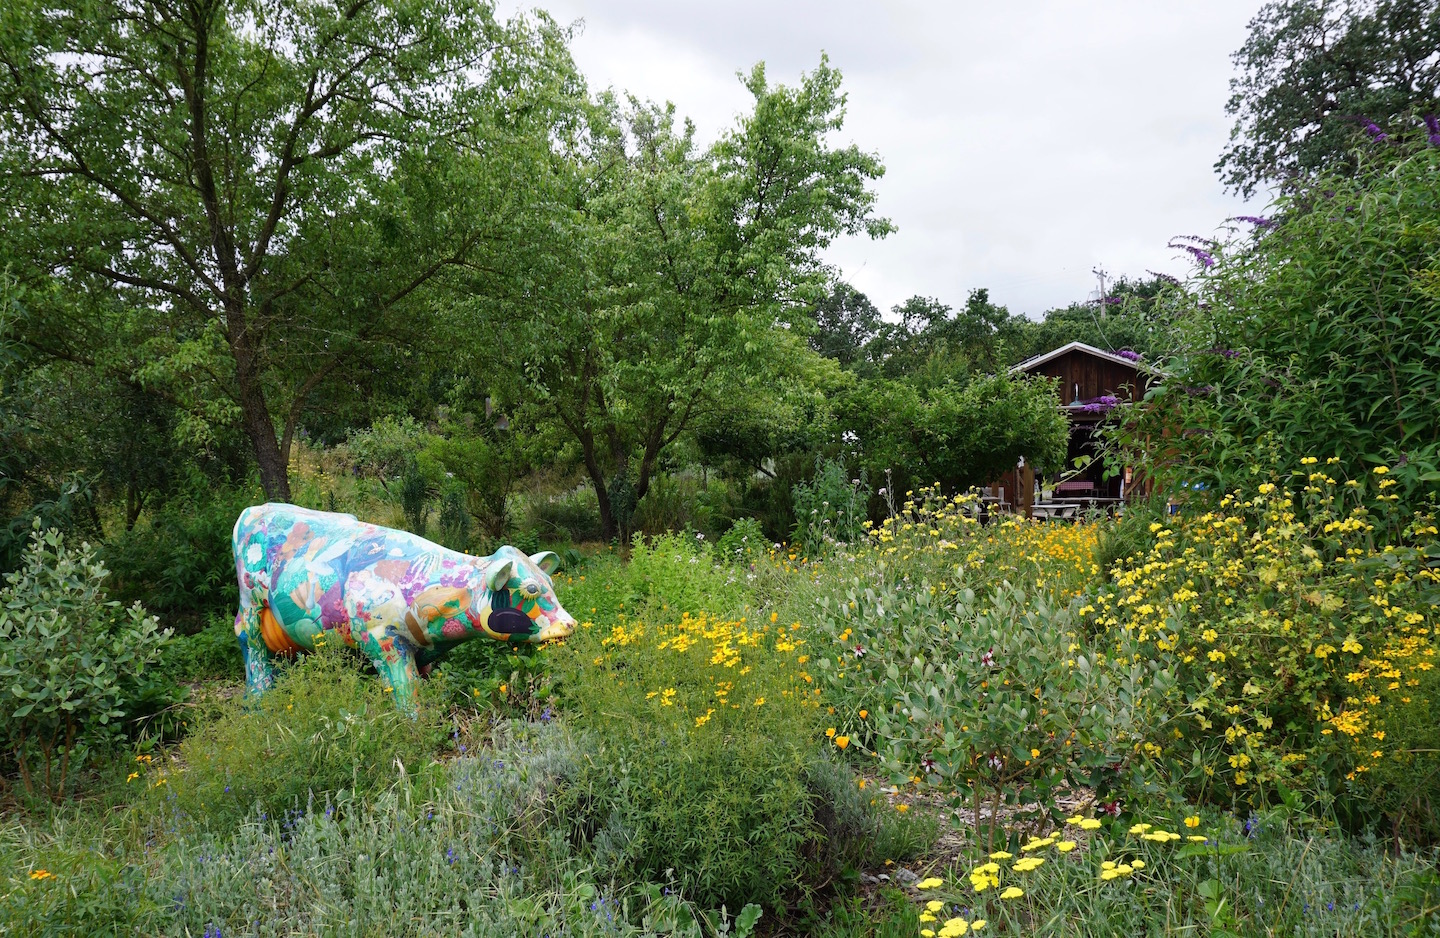 Sclupture of a cow in a garden with flowers and trees with small barn in the background.